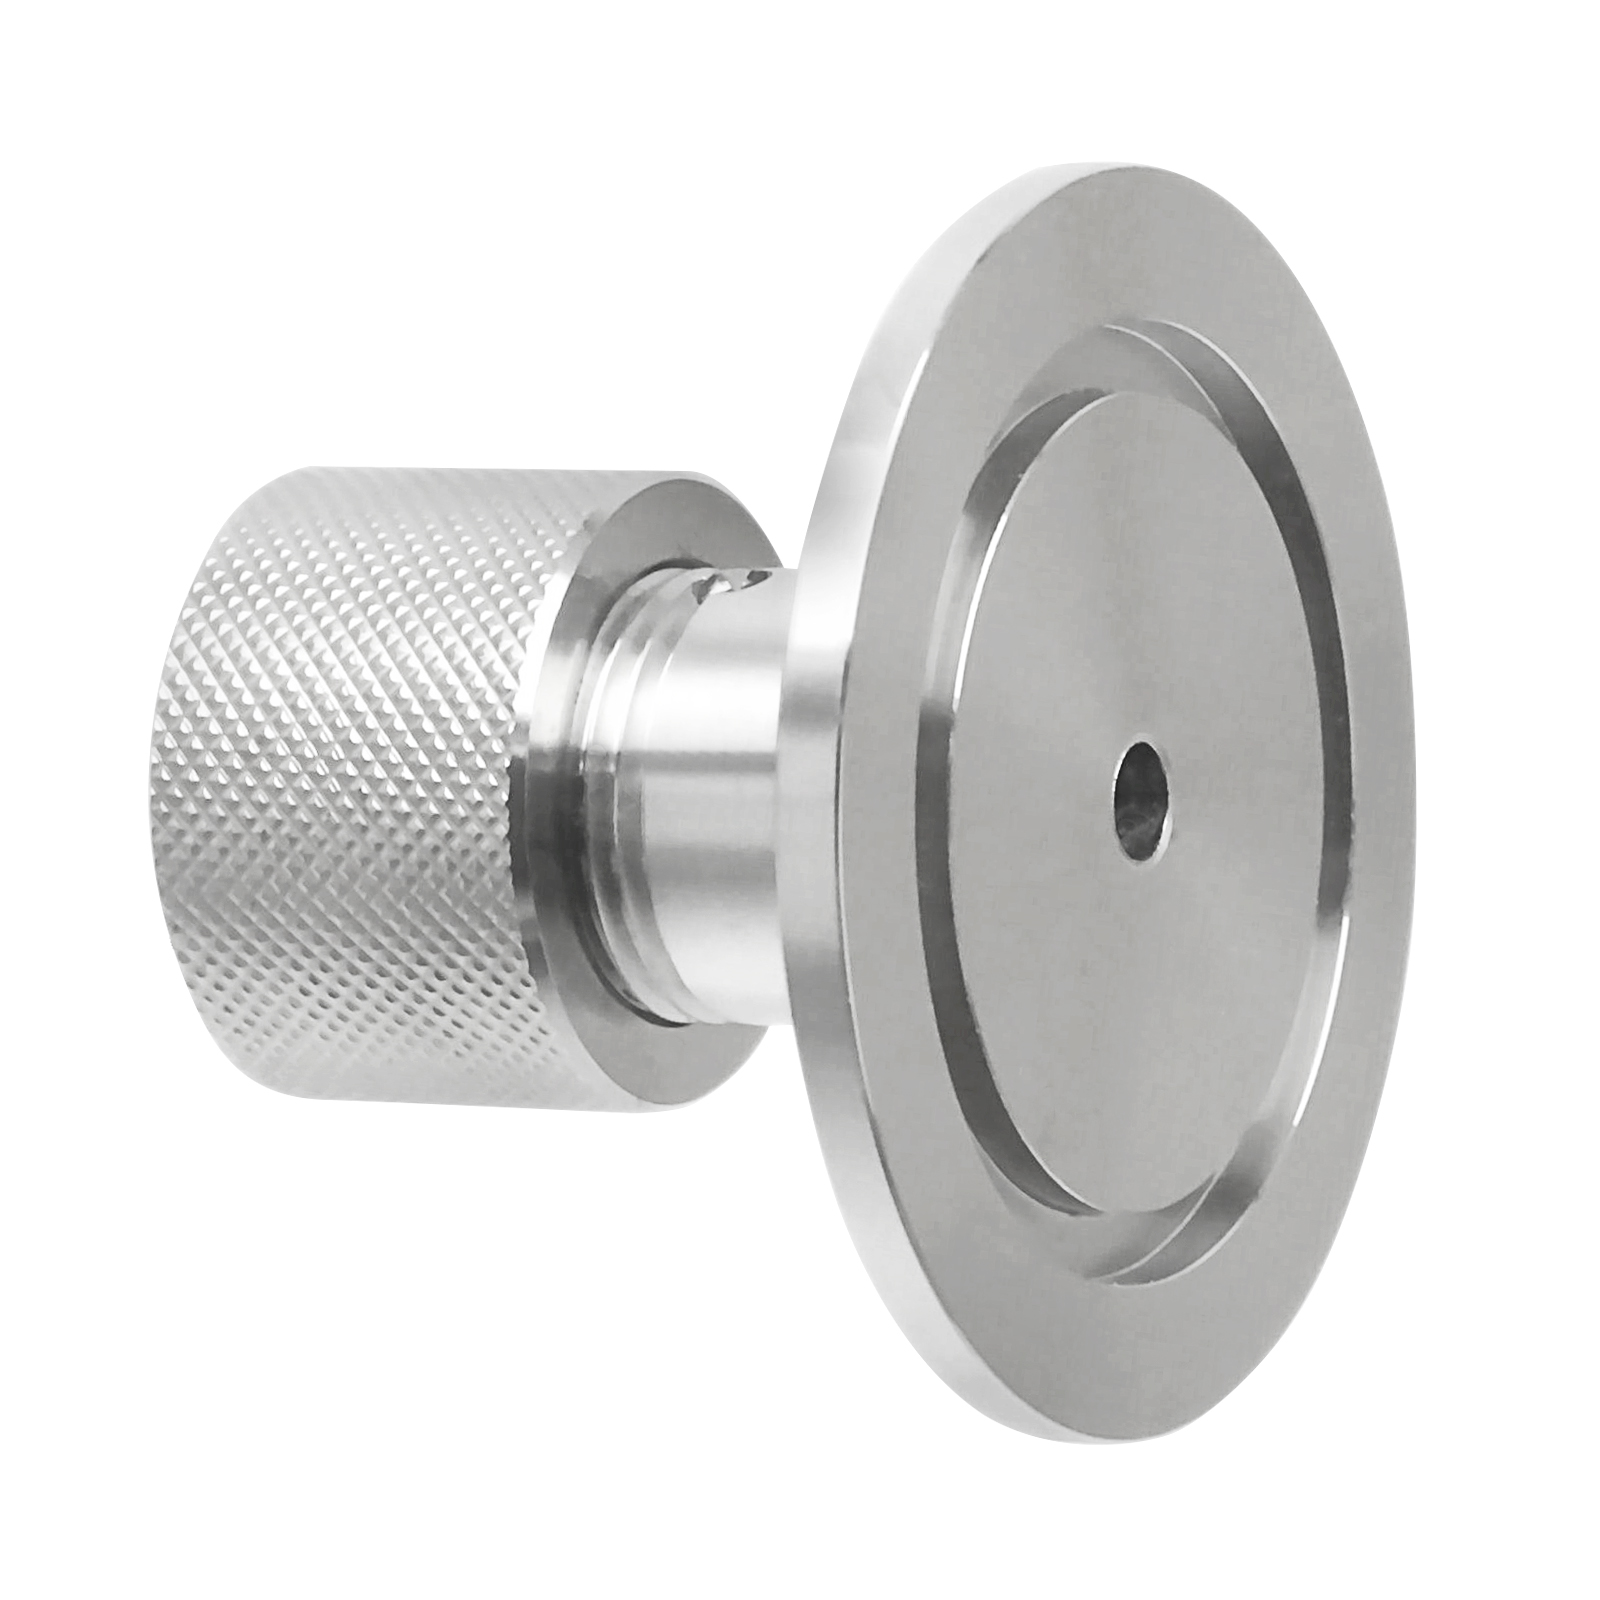 KF40 Flange Stainless Steel Vacuum Vent Valve Or Relief Valve For Vaccum System